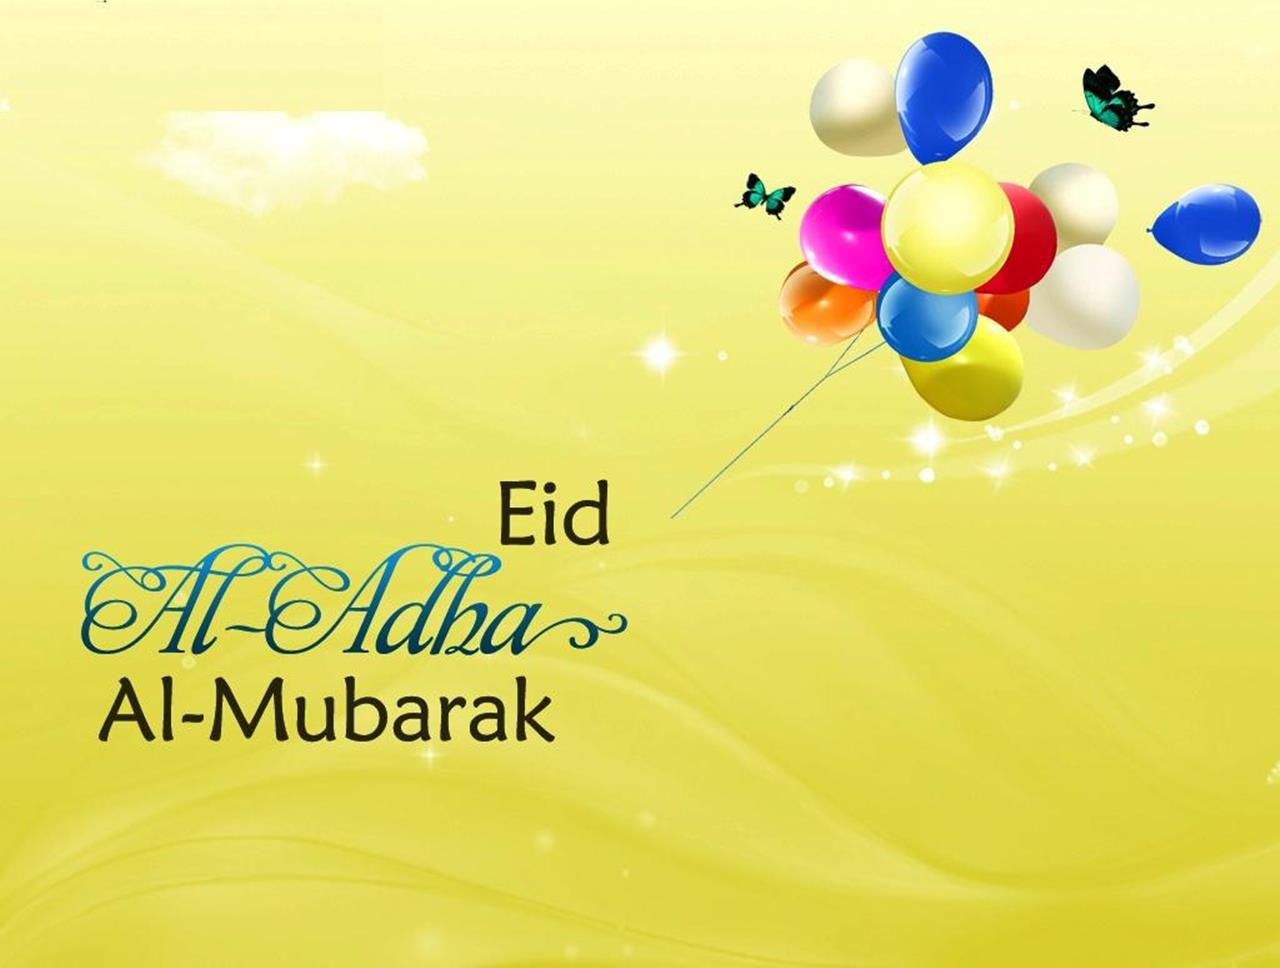 Happy EID Ul Adha Wallpapers - New Greeting Cards 2014 